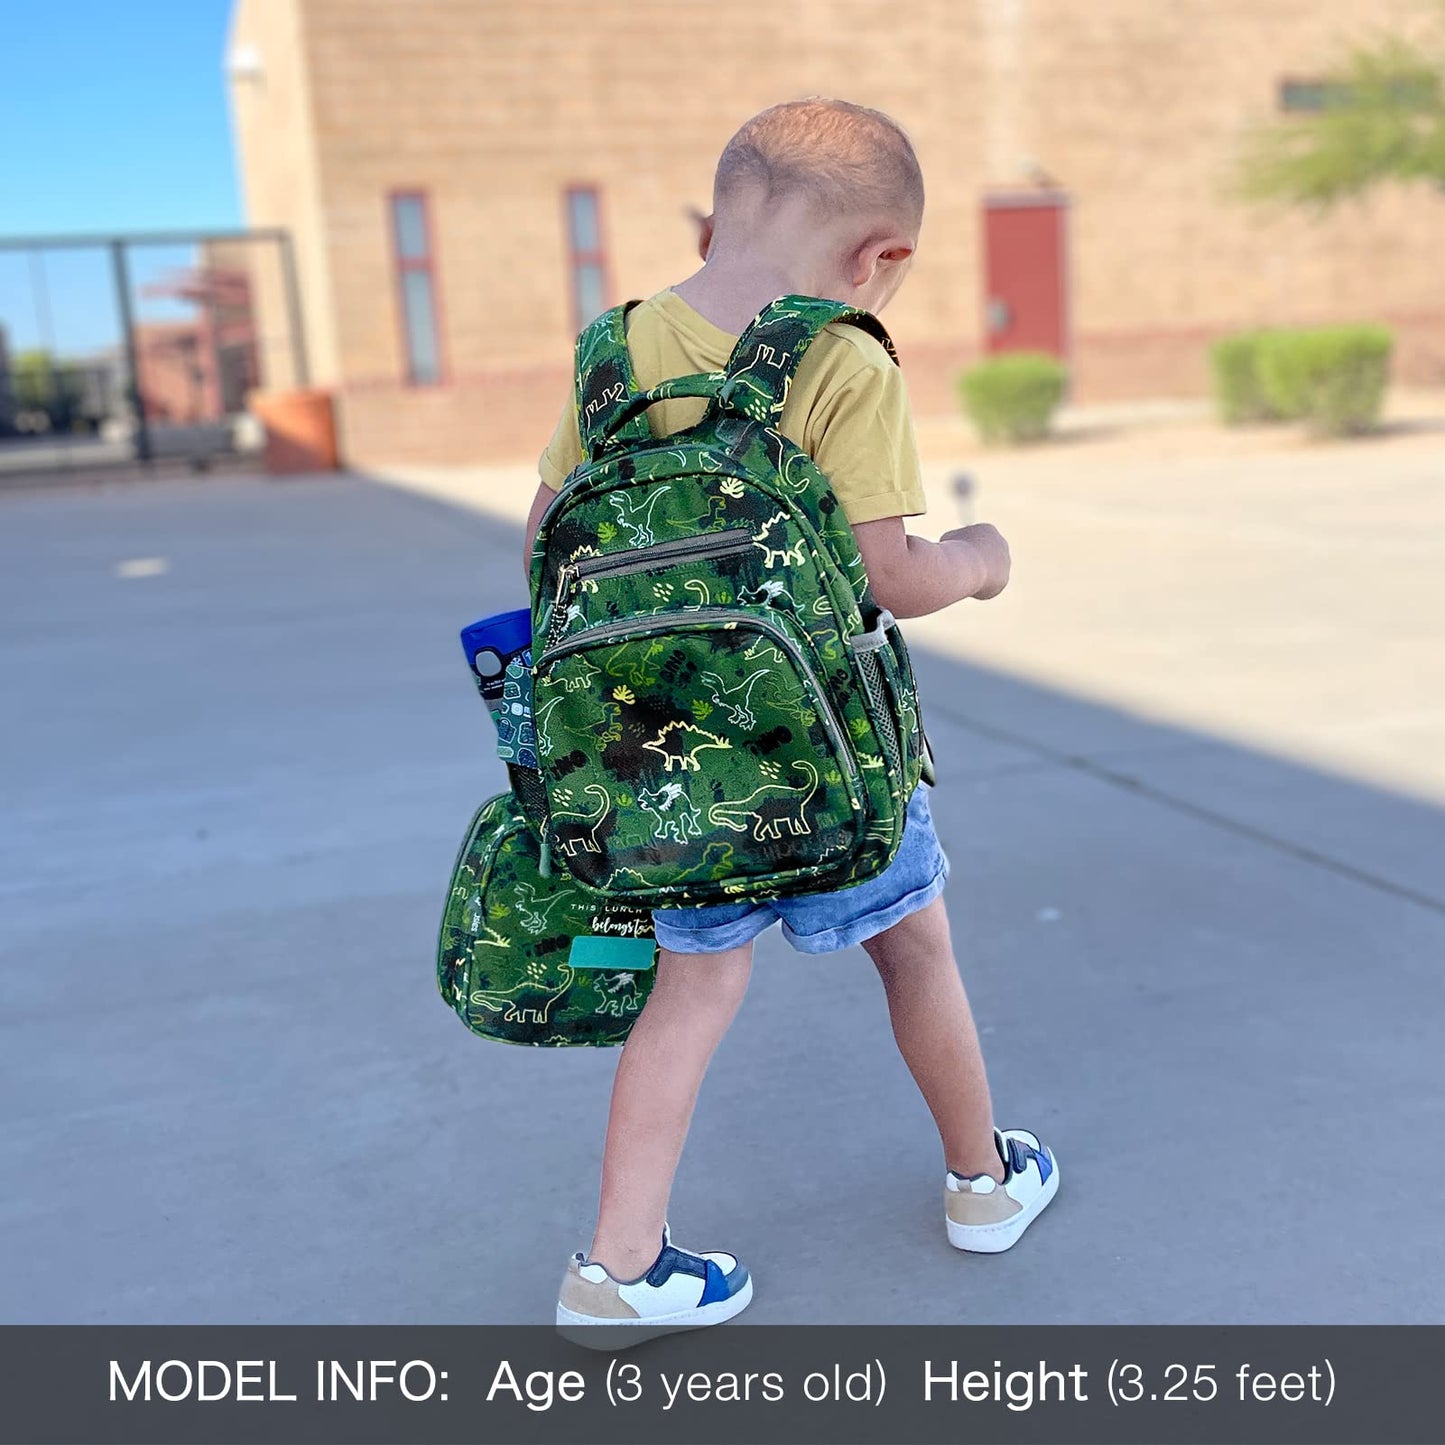 mibasies Toddler Backpack for Boys and Girls, Ideal kids backpack for Preschool and Kindergarten